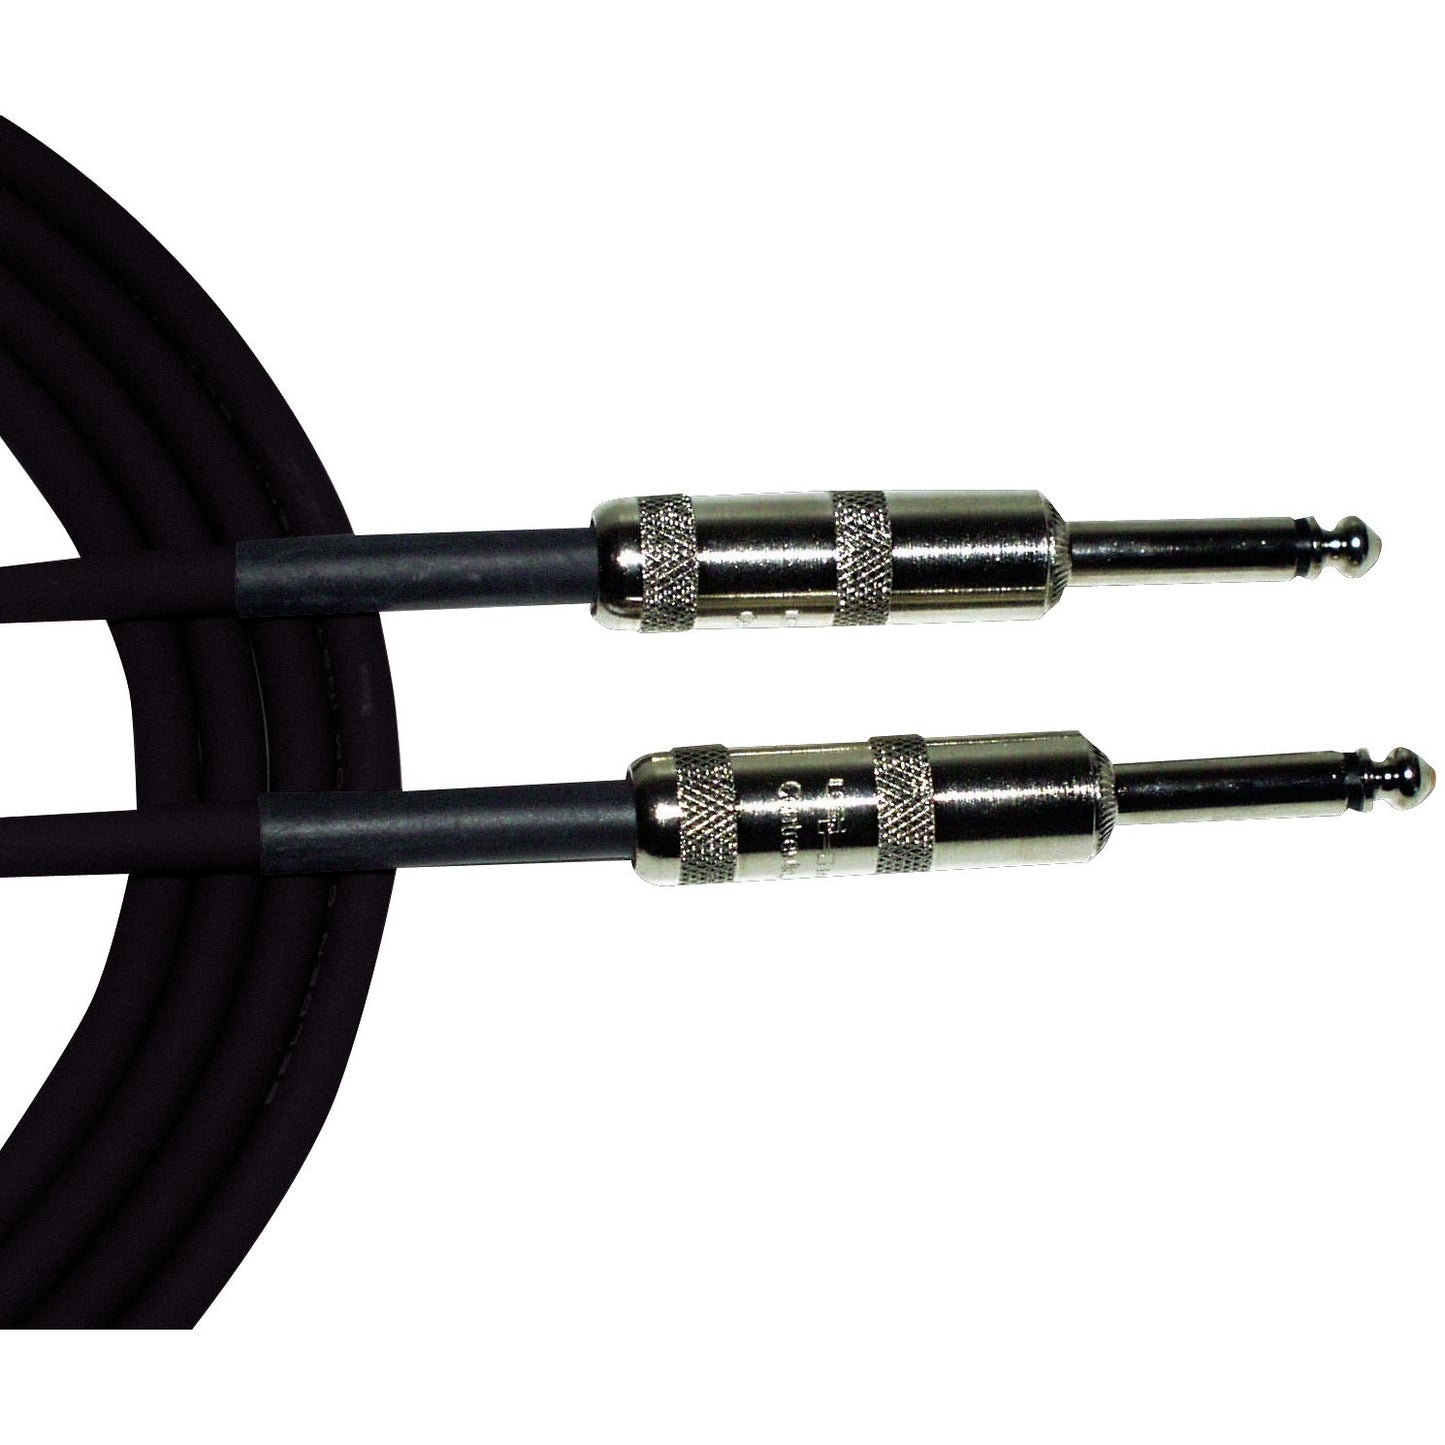 CBI GA1 American-Made Instrument Cable with Straight Plugs, 6 Foot